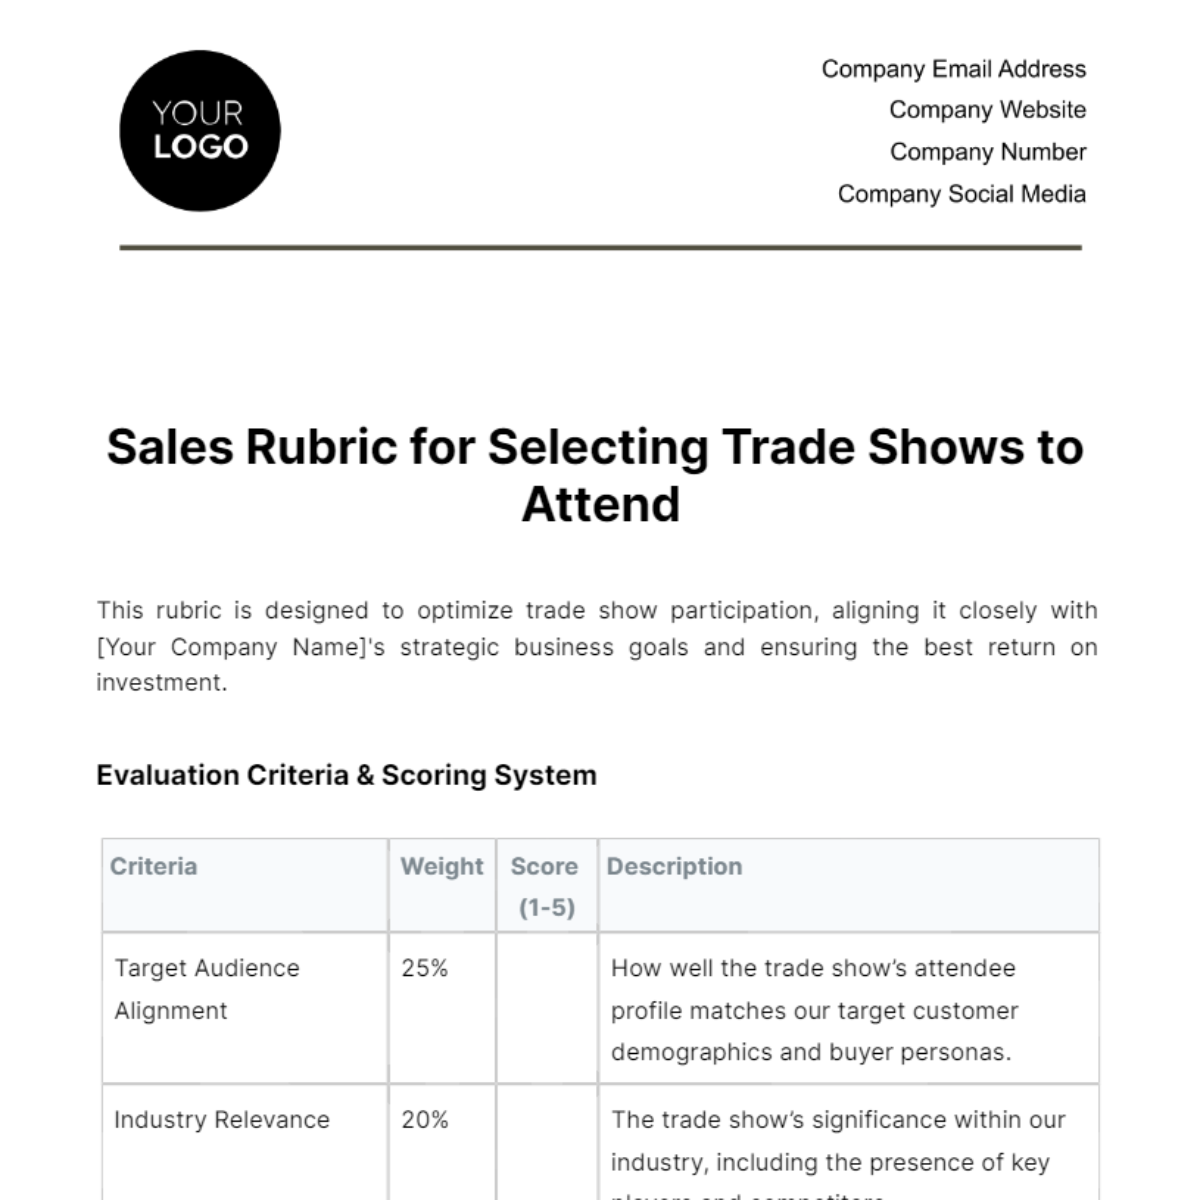 Sales Rubric for Selecting Trade Shows to Attend Template